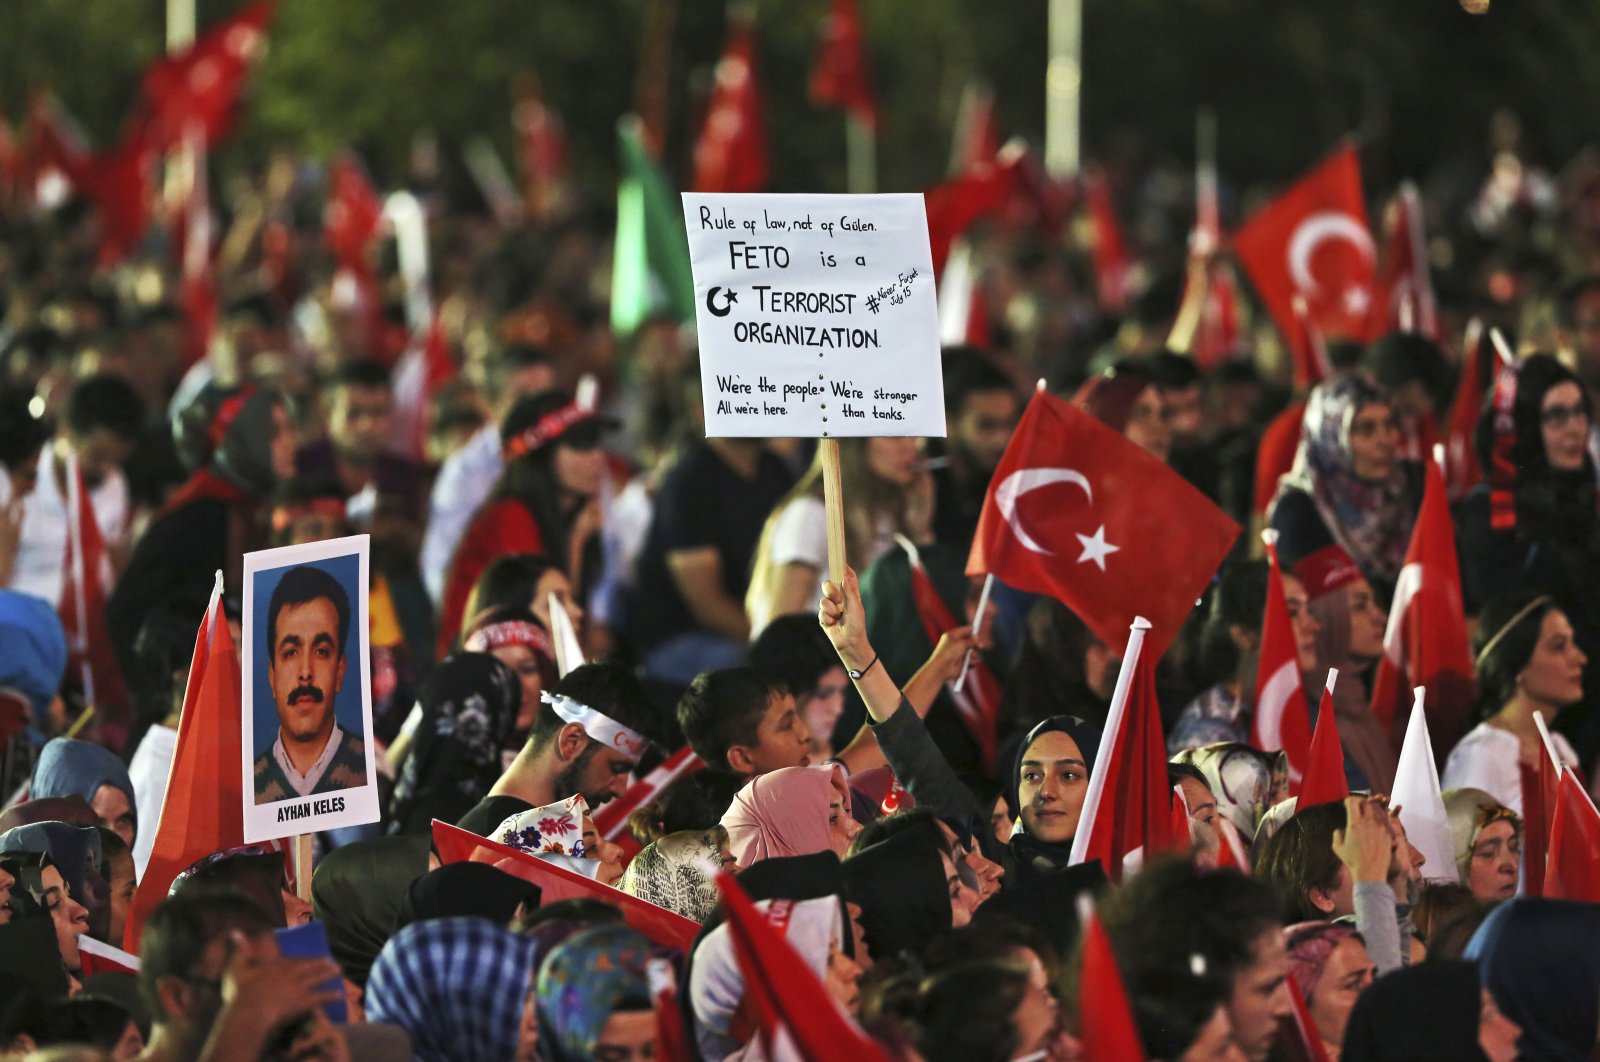 People hold placards denouncing FETÖ in a rally to mark the anniversary of the foiled coup attempt, in the capital Ankara, Türkiye, July 16, 2017. (AP Photo)